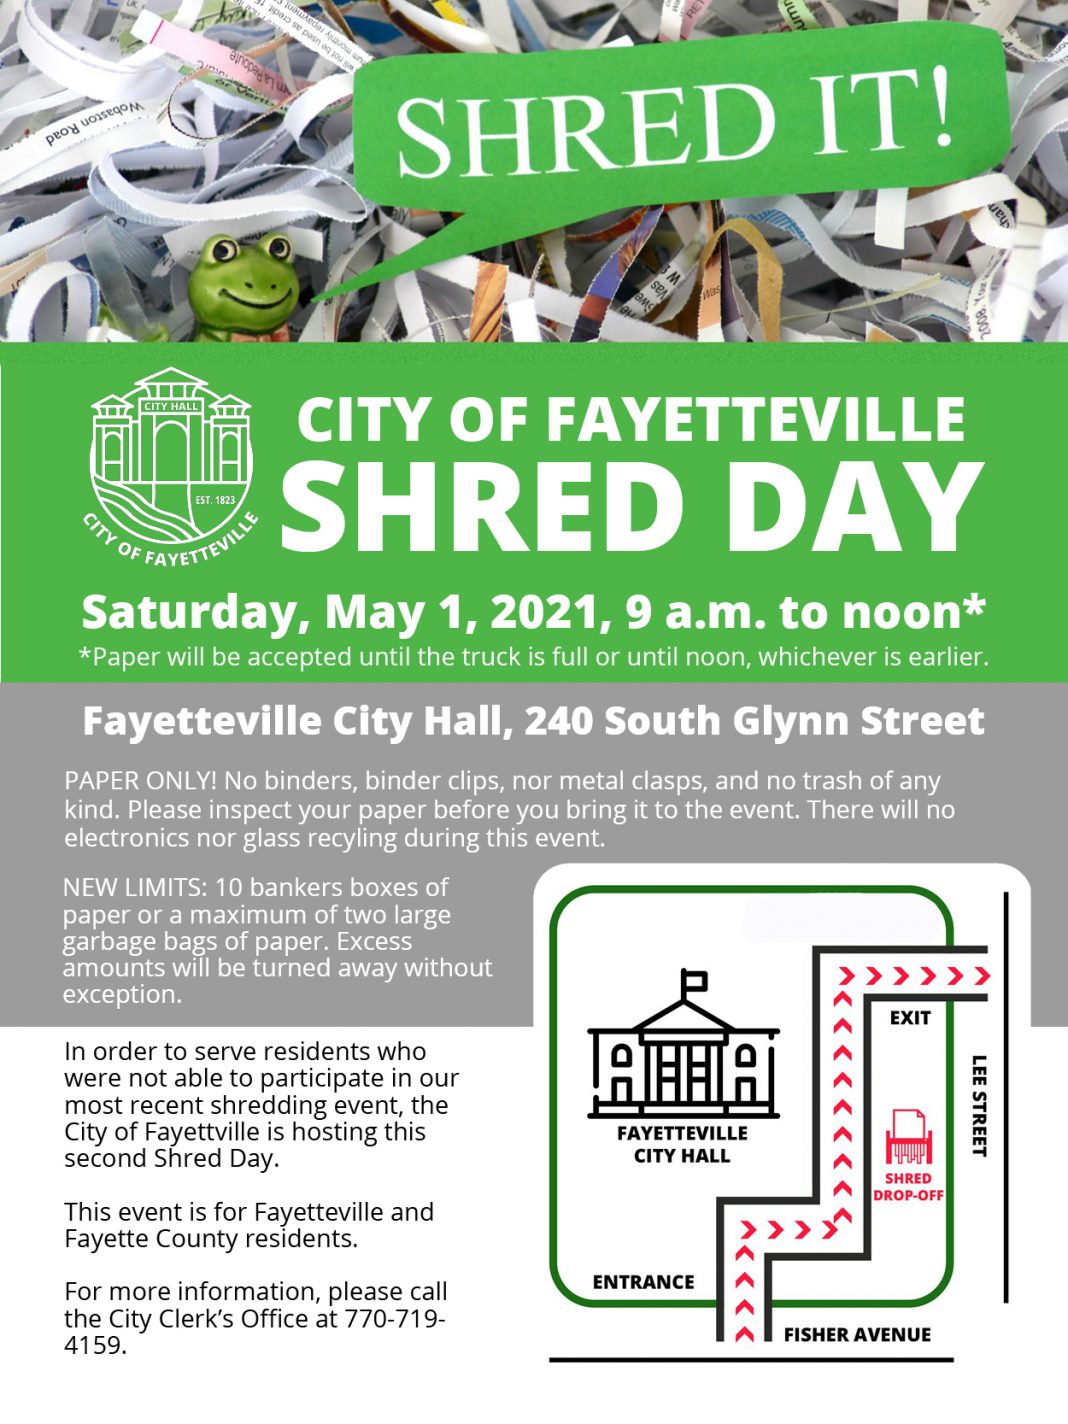 Fayetteville plans to host another papershredding event The Citizen